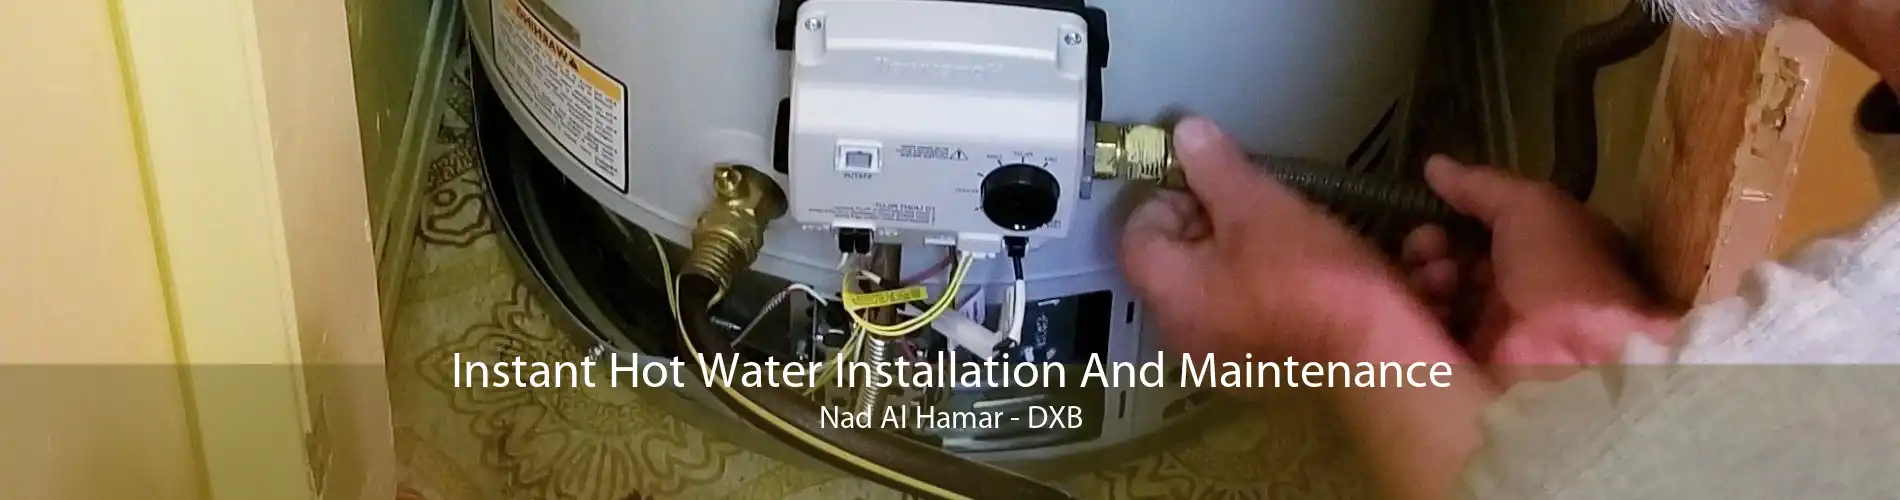 Instant Hot Water Installation And Maintenance Nad Al Hamar - DXB